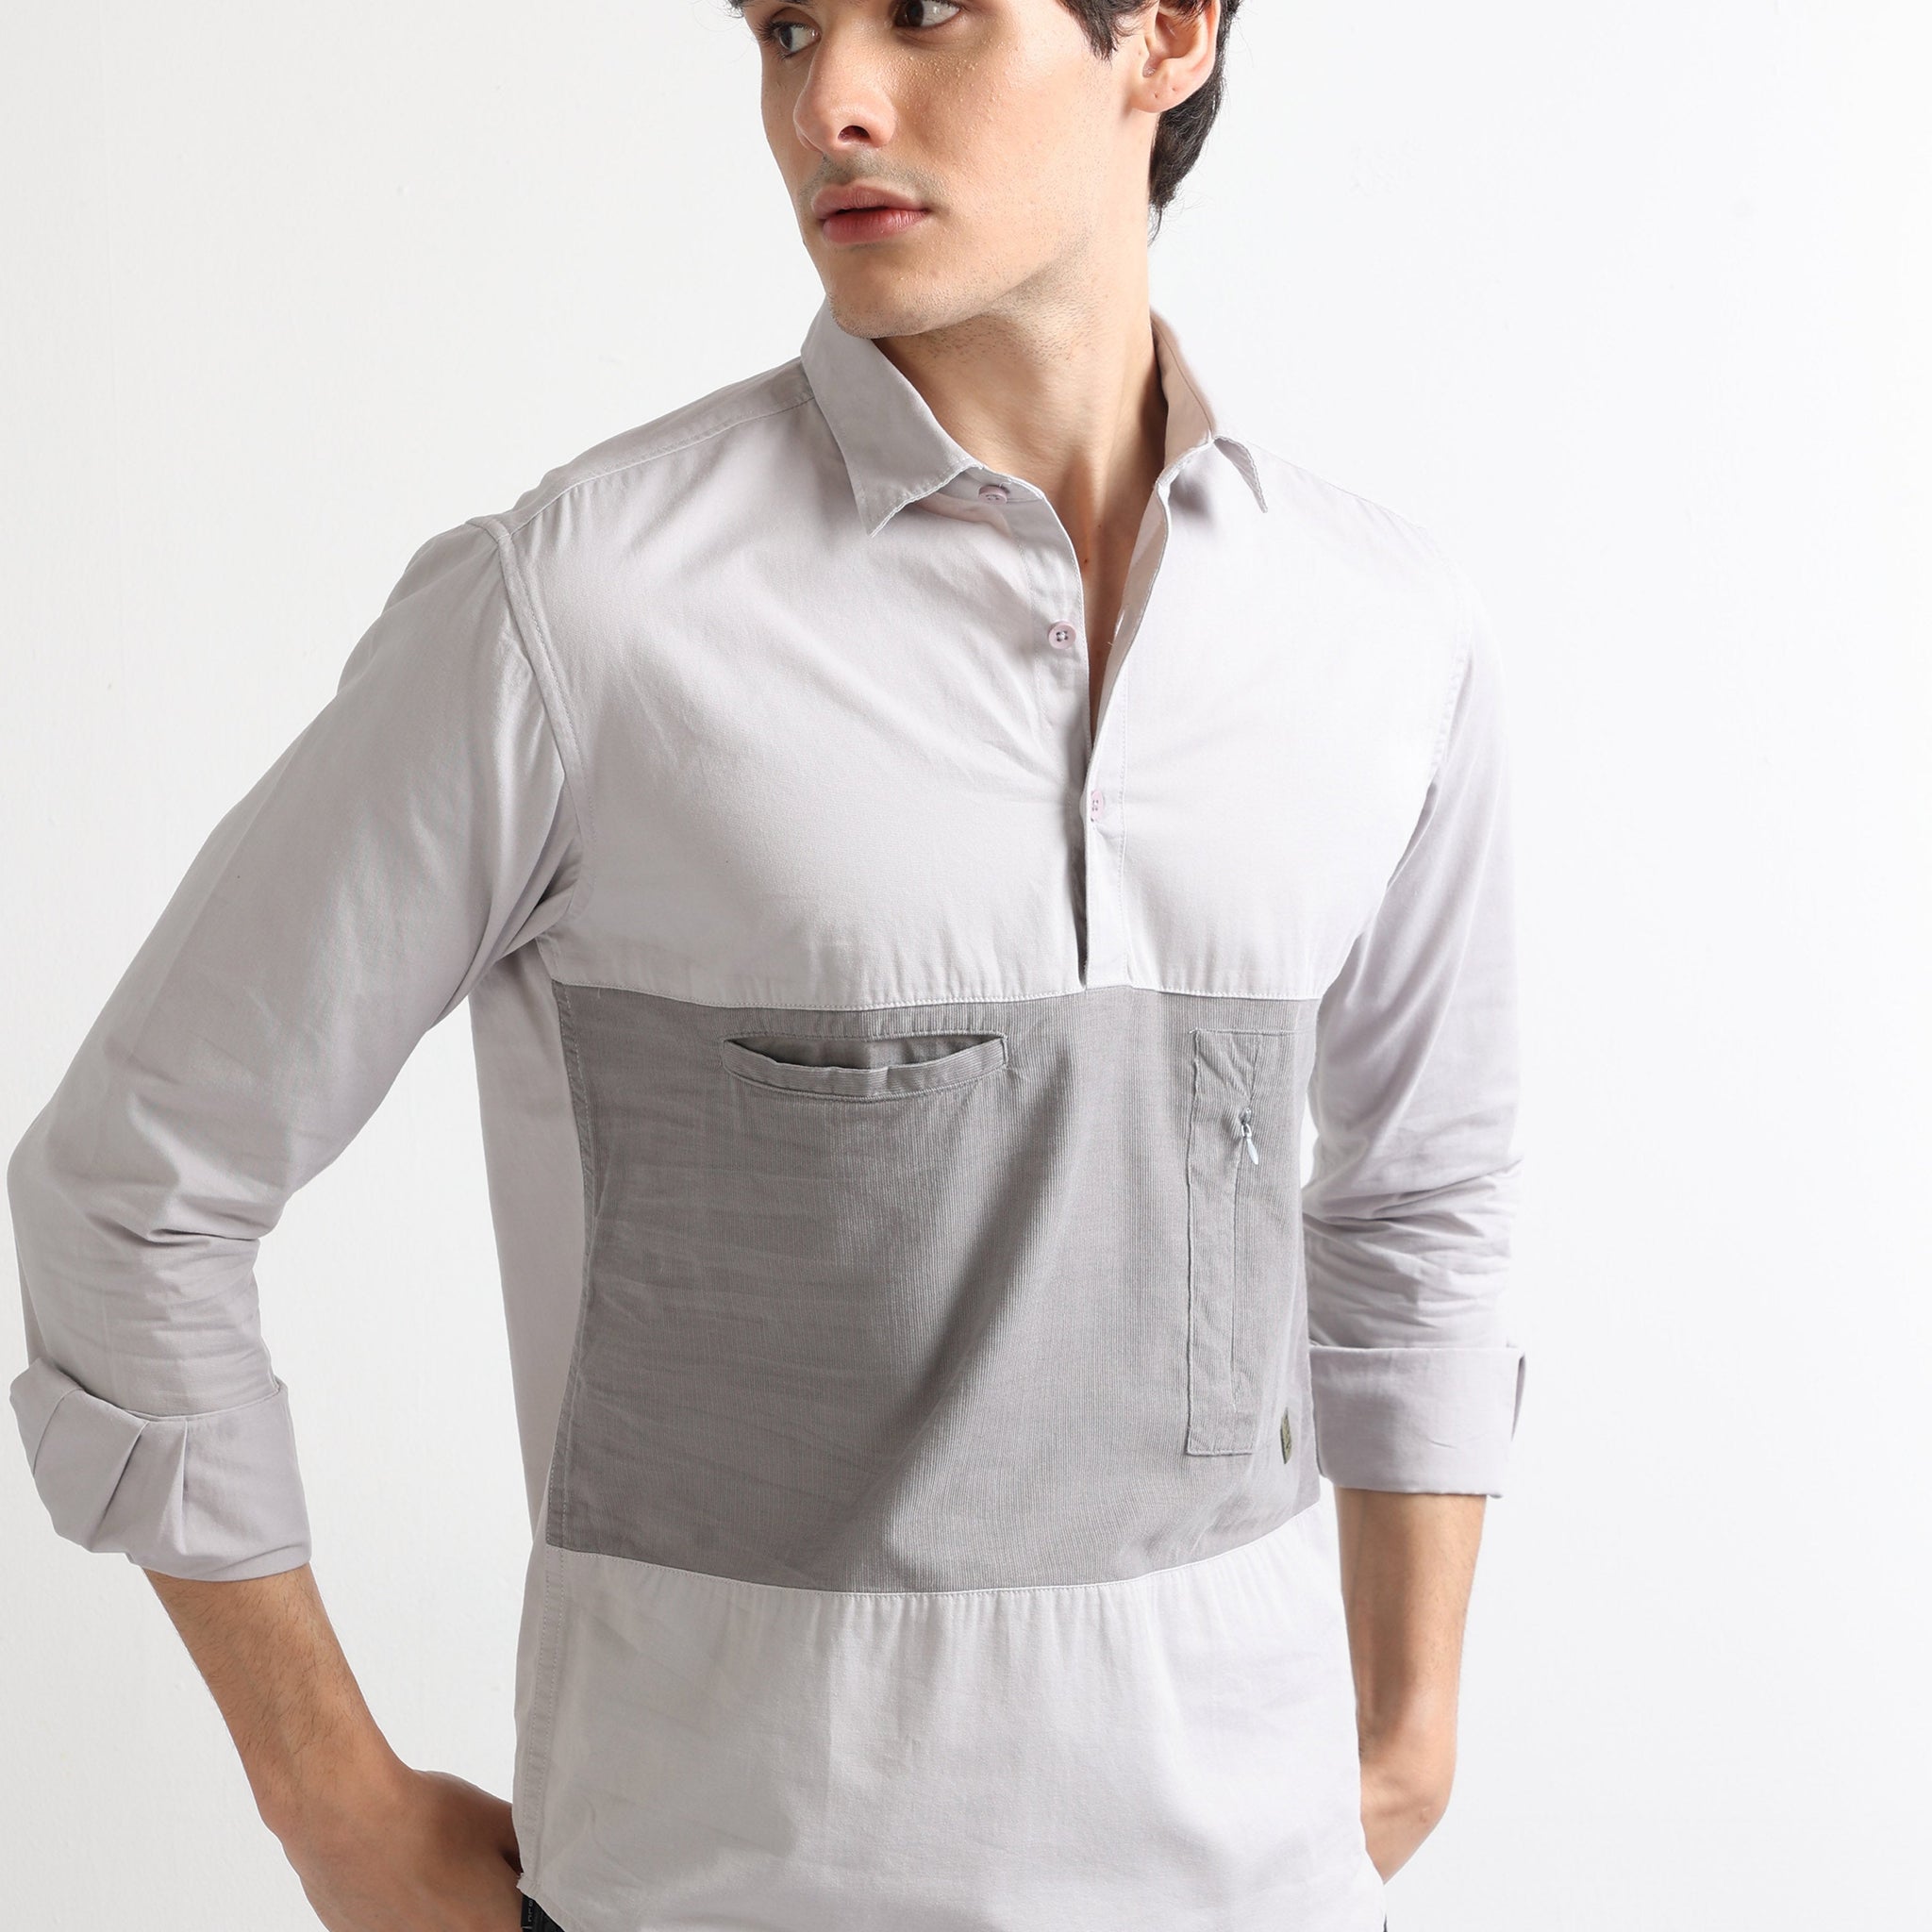 Buy Grunt Self Color Cut And Sew Stylish Open Collar Shirt Online.